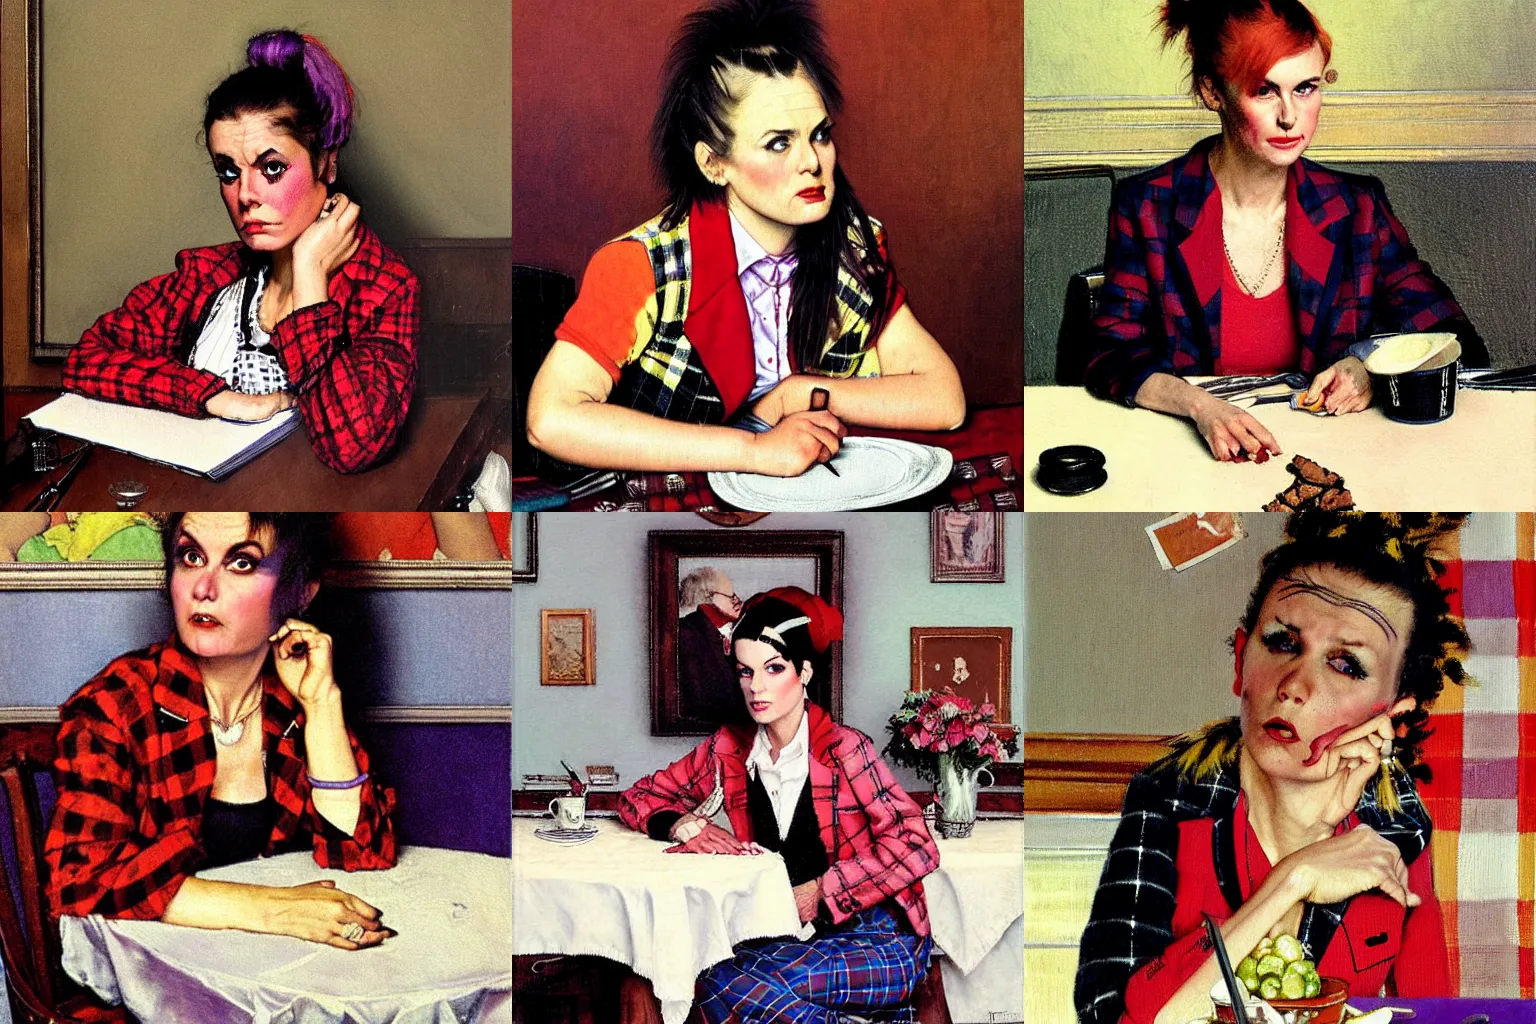 Prompt: A small, irritated punk woman, dressed in a plaid blazer over a red shirt, a high ponytail, and heavy purple eyeshadow, leans against a table and looks up with disdain. Painting by Norman Rockwell.